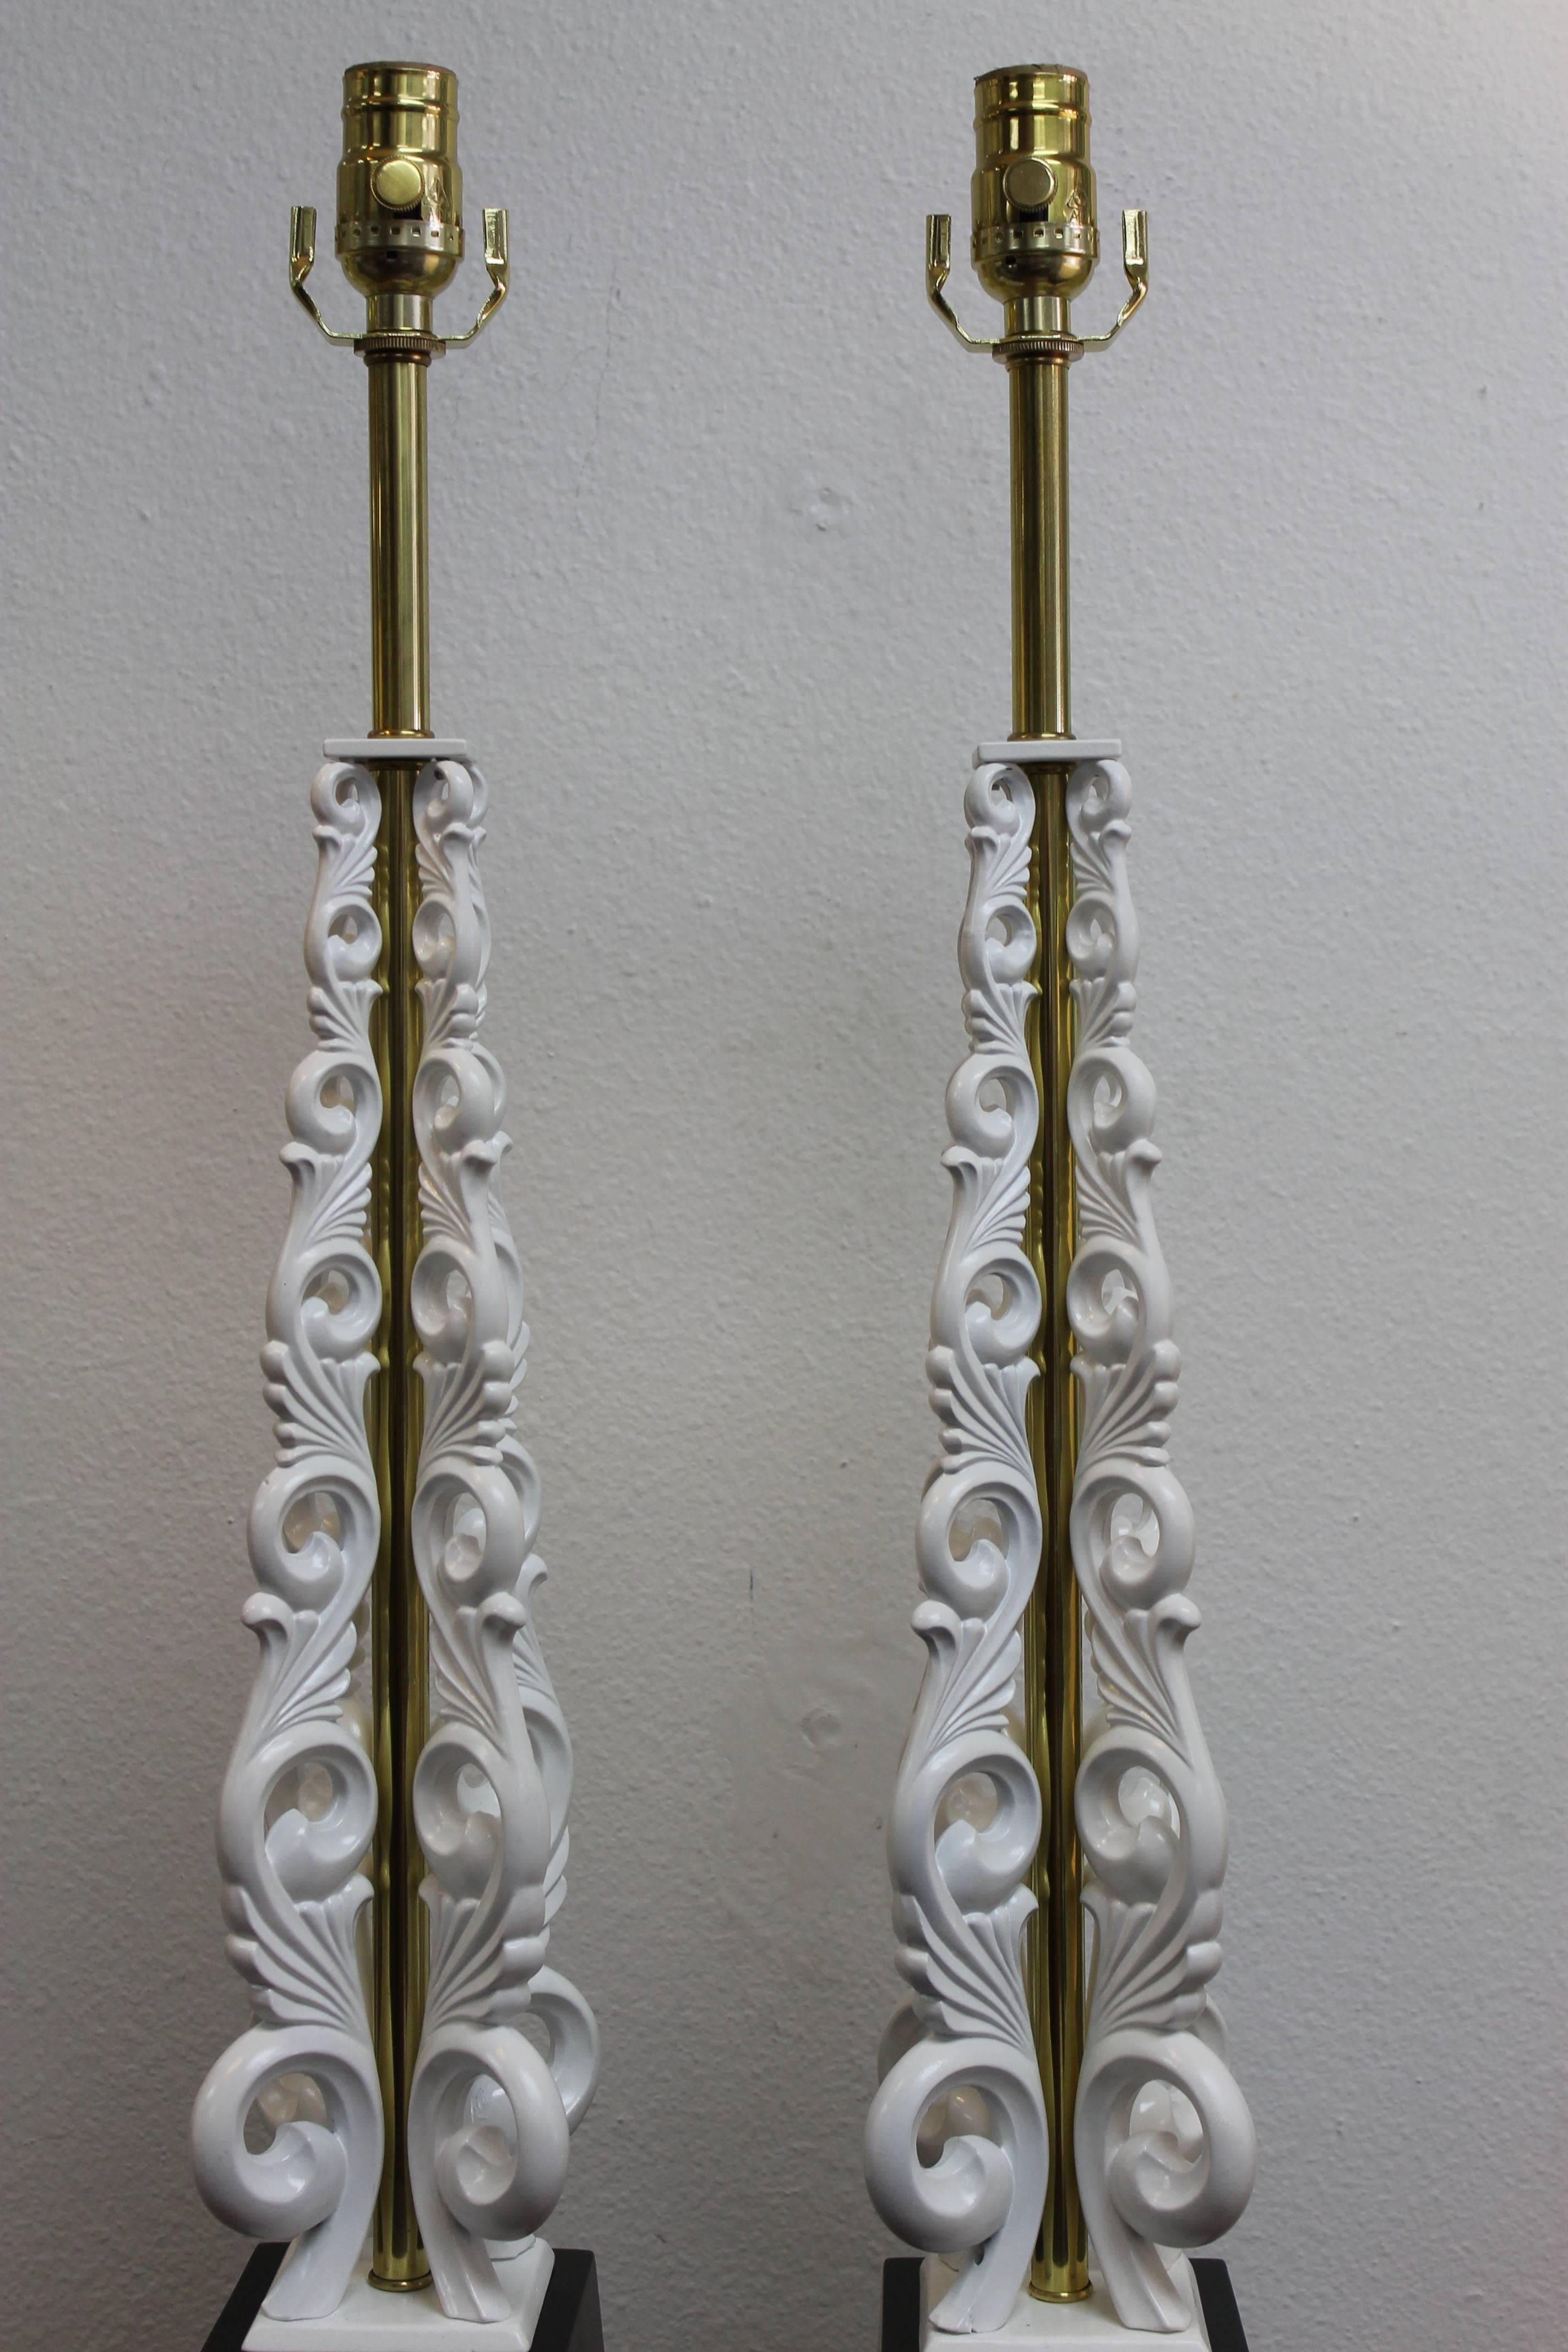 American Pair of Monumental Lamps, Attributed to Laurel Lamp Co.